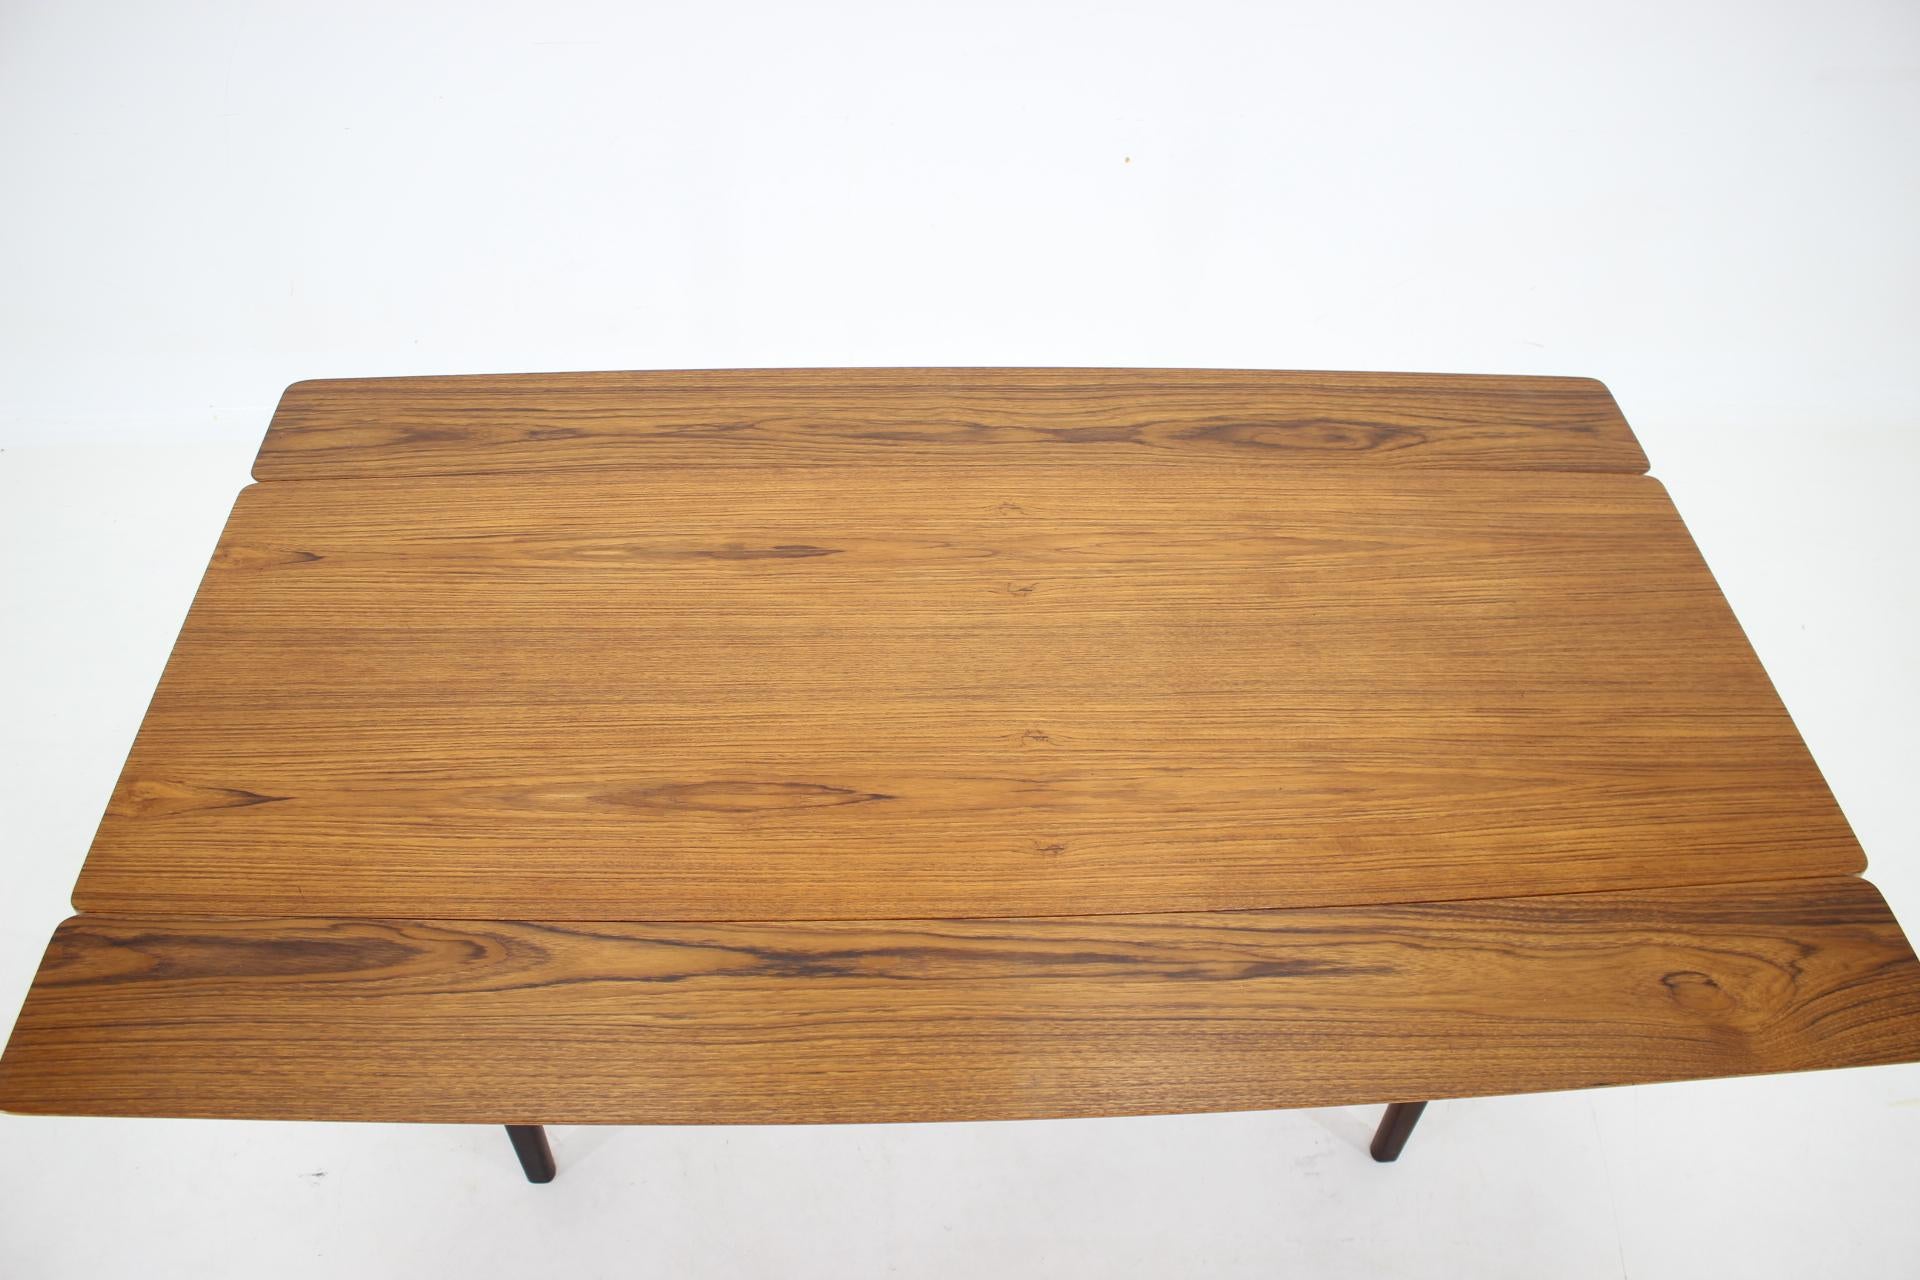 1960s Danish Teak Adjustable and Extendable Coffee Table, Denmark  For Sale 3